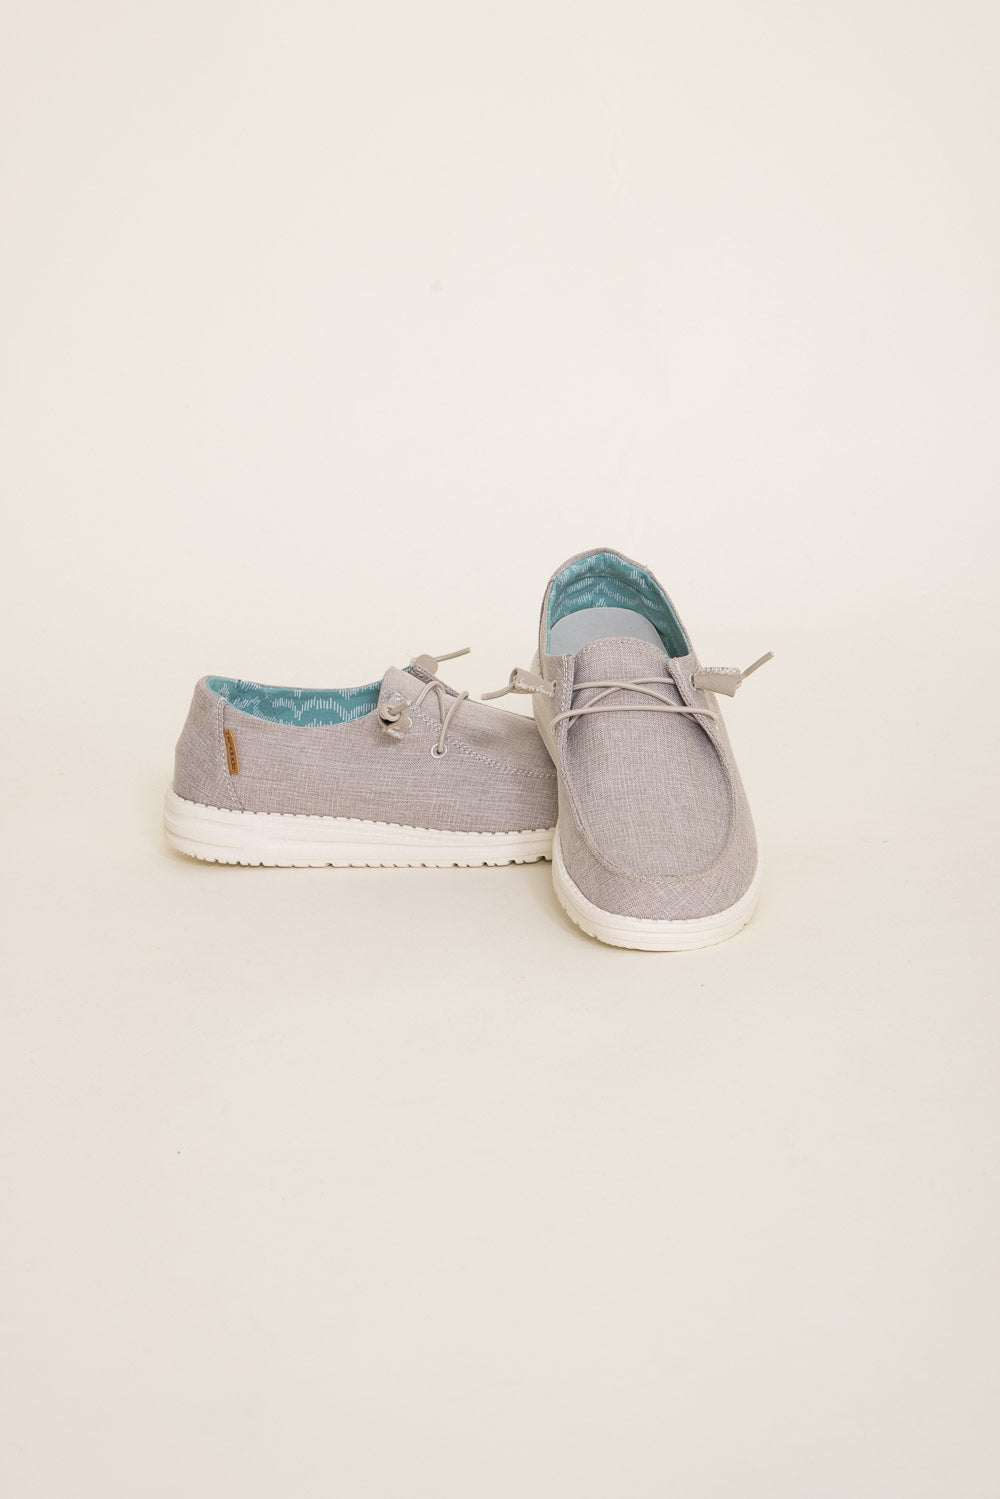 Hey Dude Women's Wendy Linen Shoes - Chambray Biege